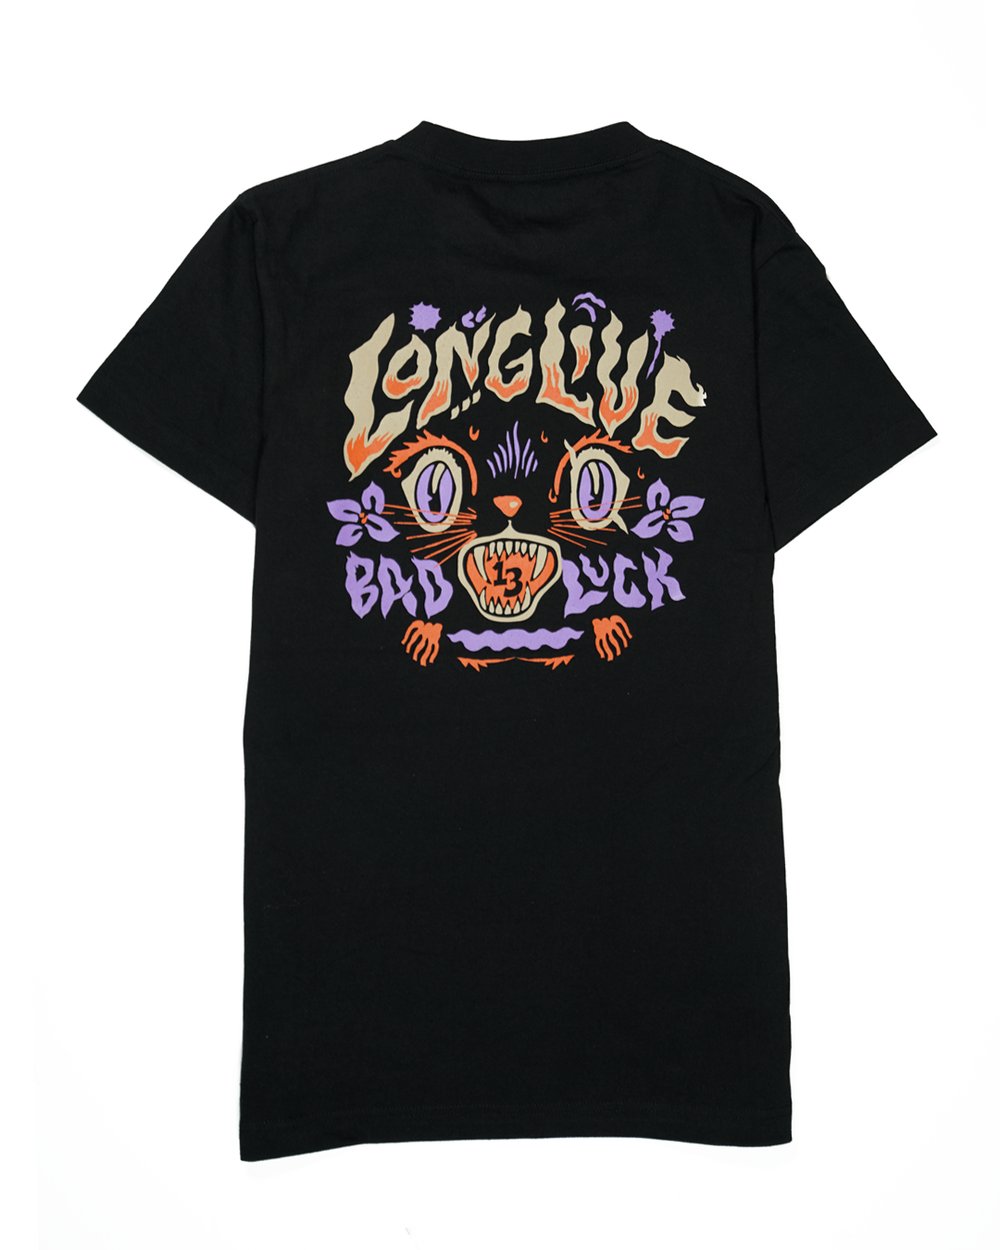 Image of Bad Luck Black Cat Tee - Long Live